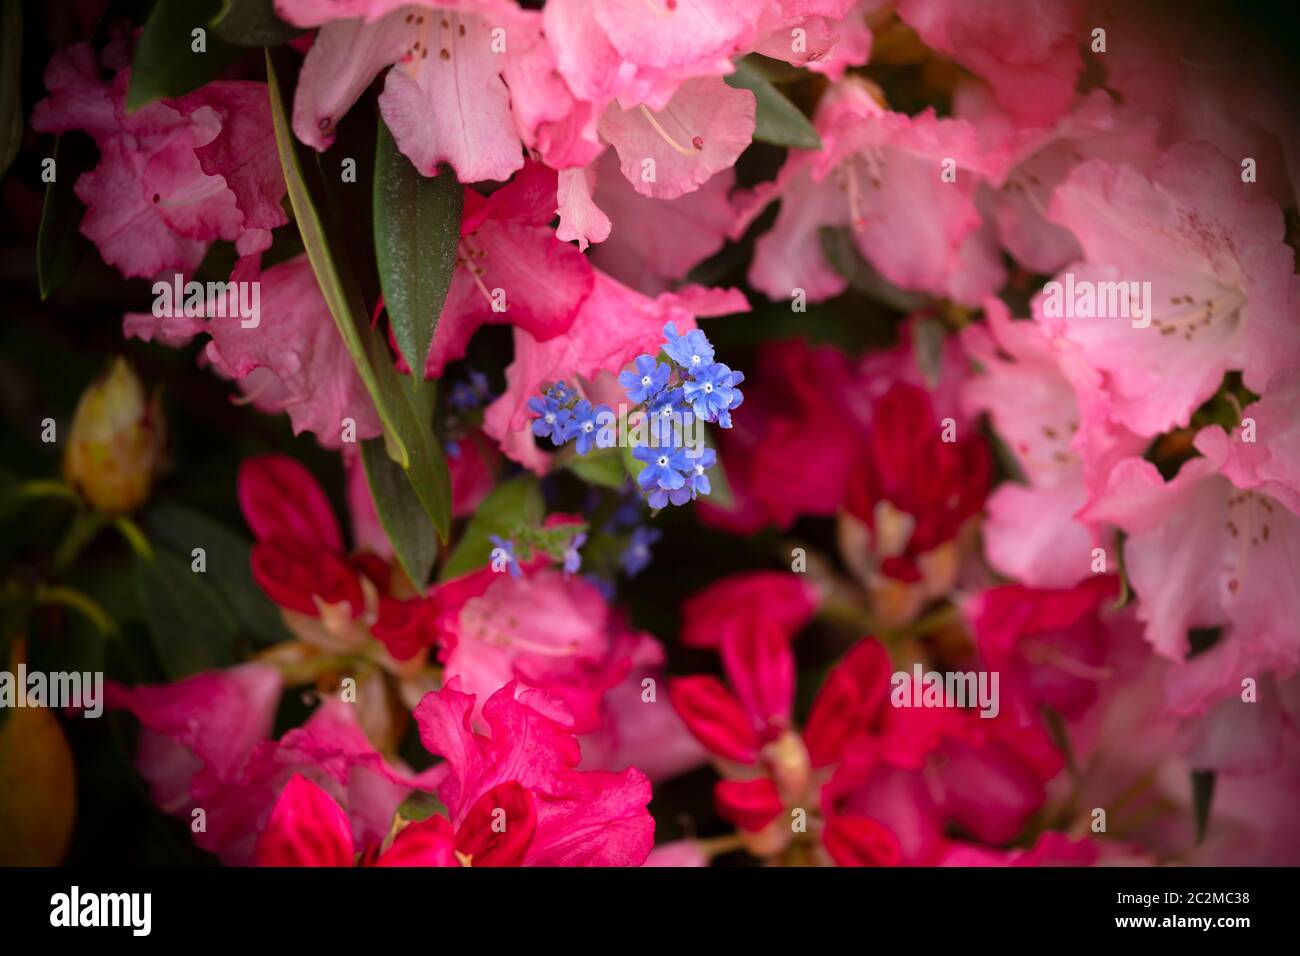 WA16909-00...WASHINGTON - A blue flower growing into a blooming rhododendron bush. Stock Photo